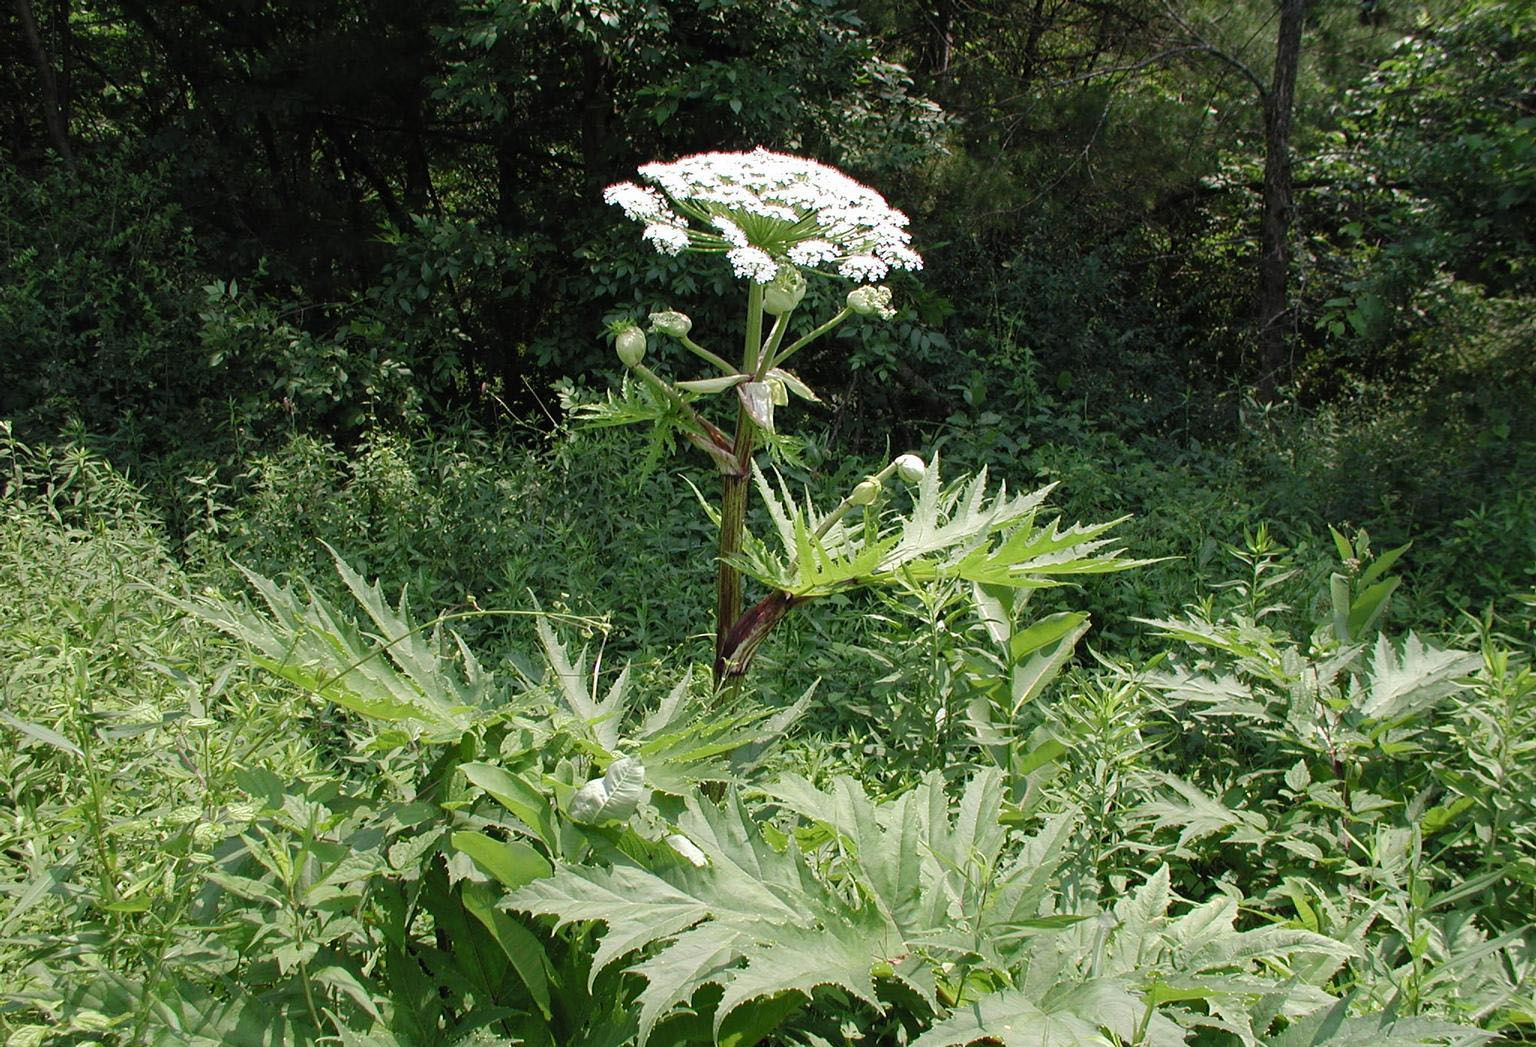 Giant hogweed can grow from 7 to 15 feet in height. (Courtesy Virginia Invasive Species)